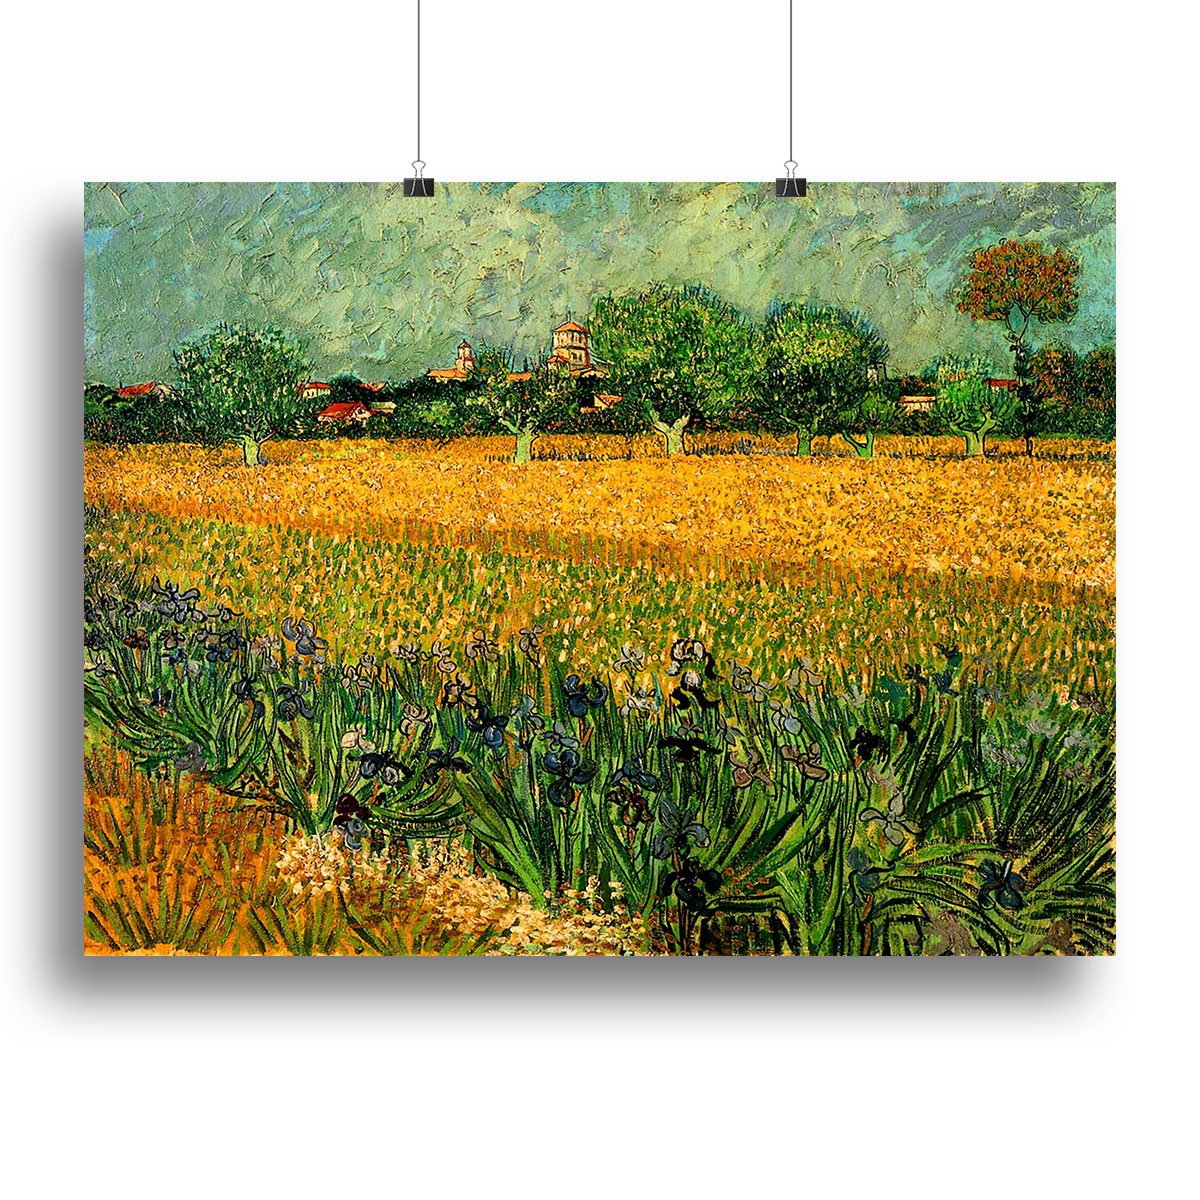 View of Arles with Irises in the Foreground by Van Gogh Canvas Print or Poster